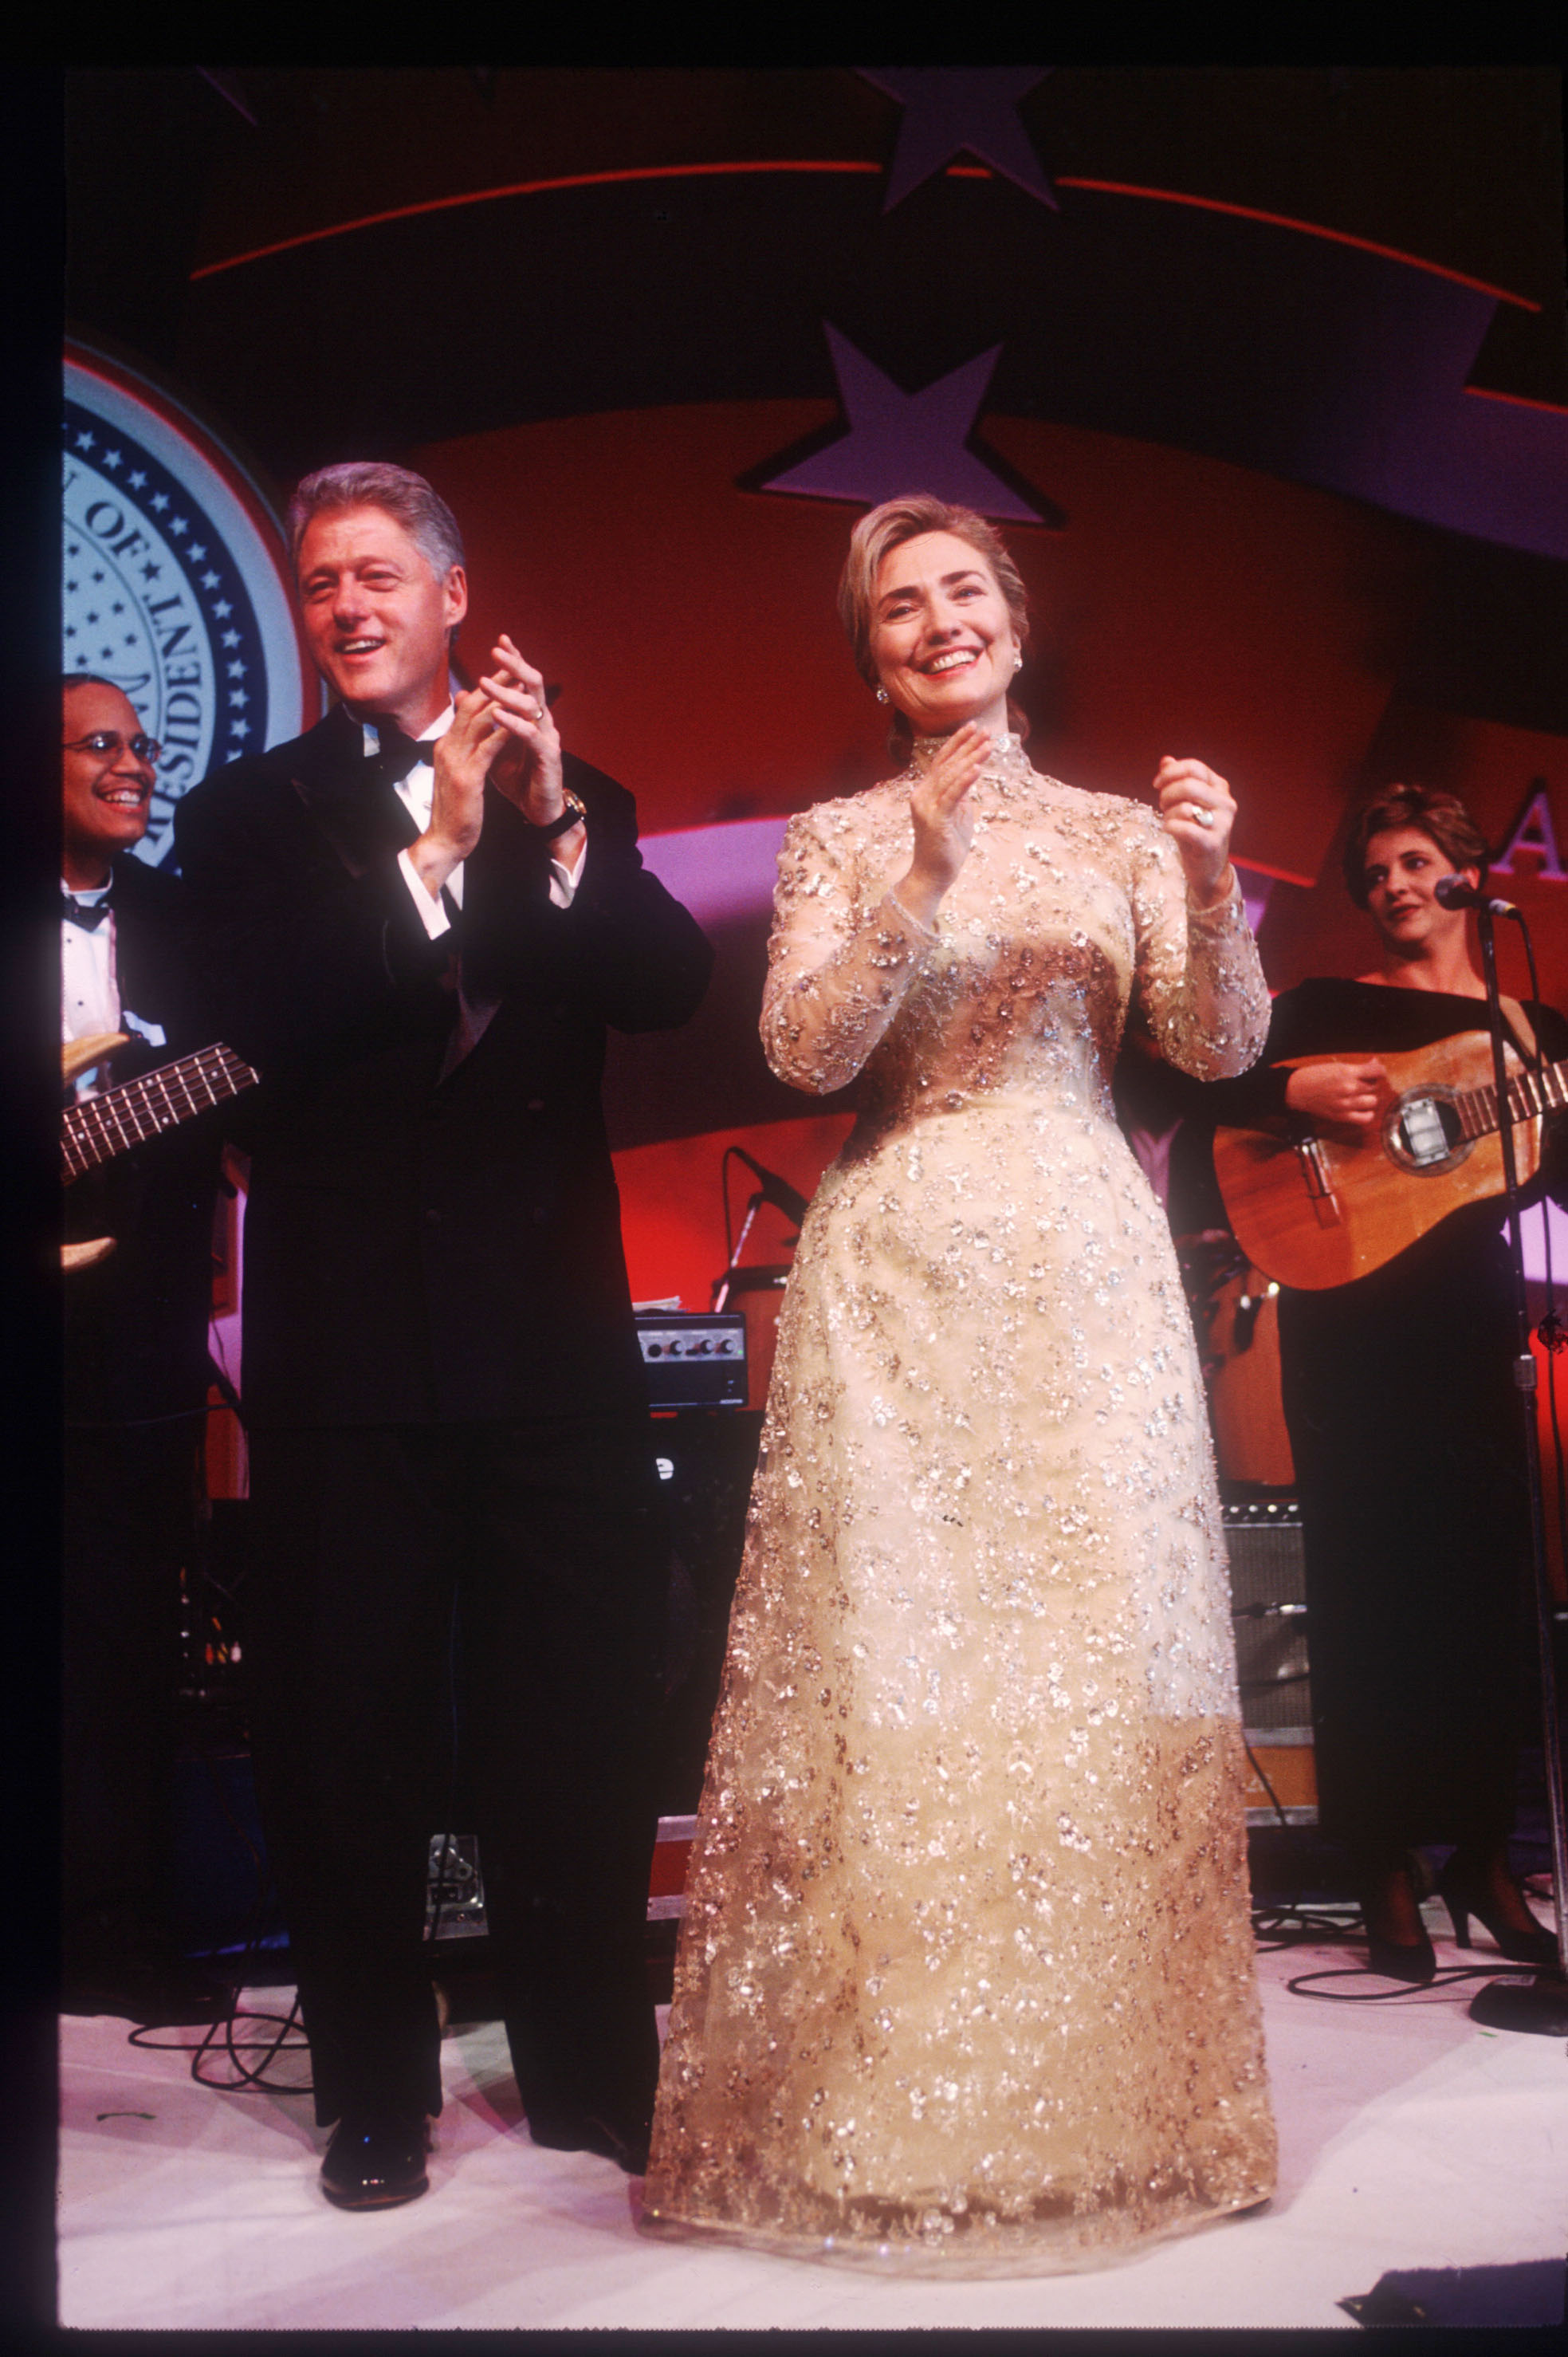 Hillary Clinton, Oscar de la Renta, 1997: Clinton wore this gold lace dress in 1997, but she first met the designer at the Kennedy Center in Dec. 1993, when he pointed out that she was wearing one of his dresses, which she claims she did not realize at the time. De la Renta has described his "friend" Hillary as "a symbol of where women want to go."